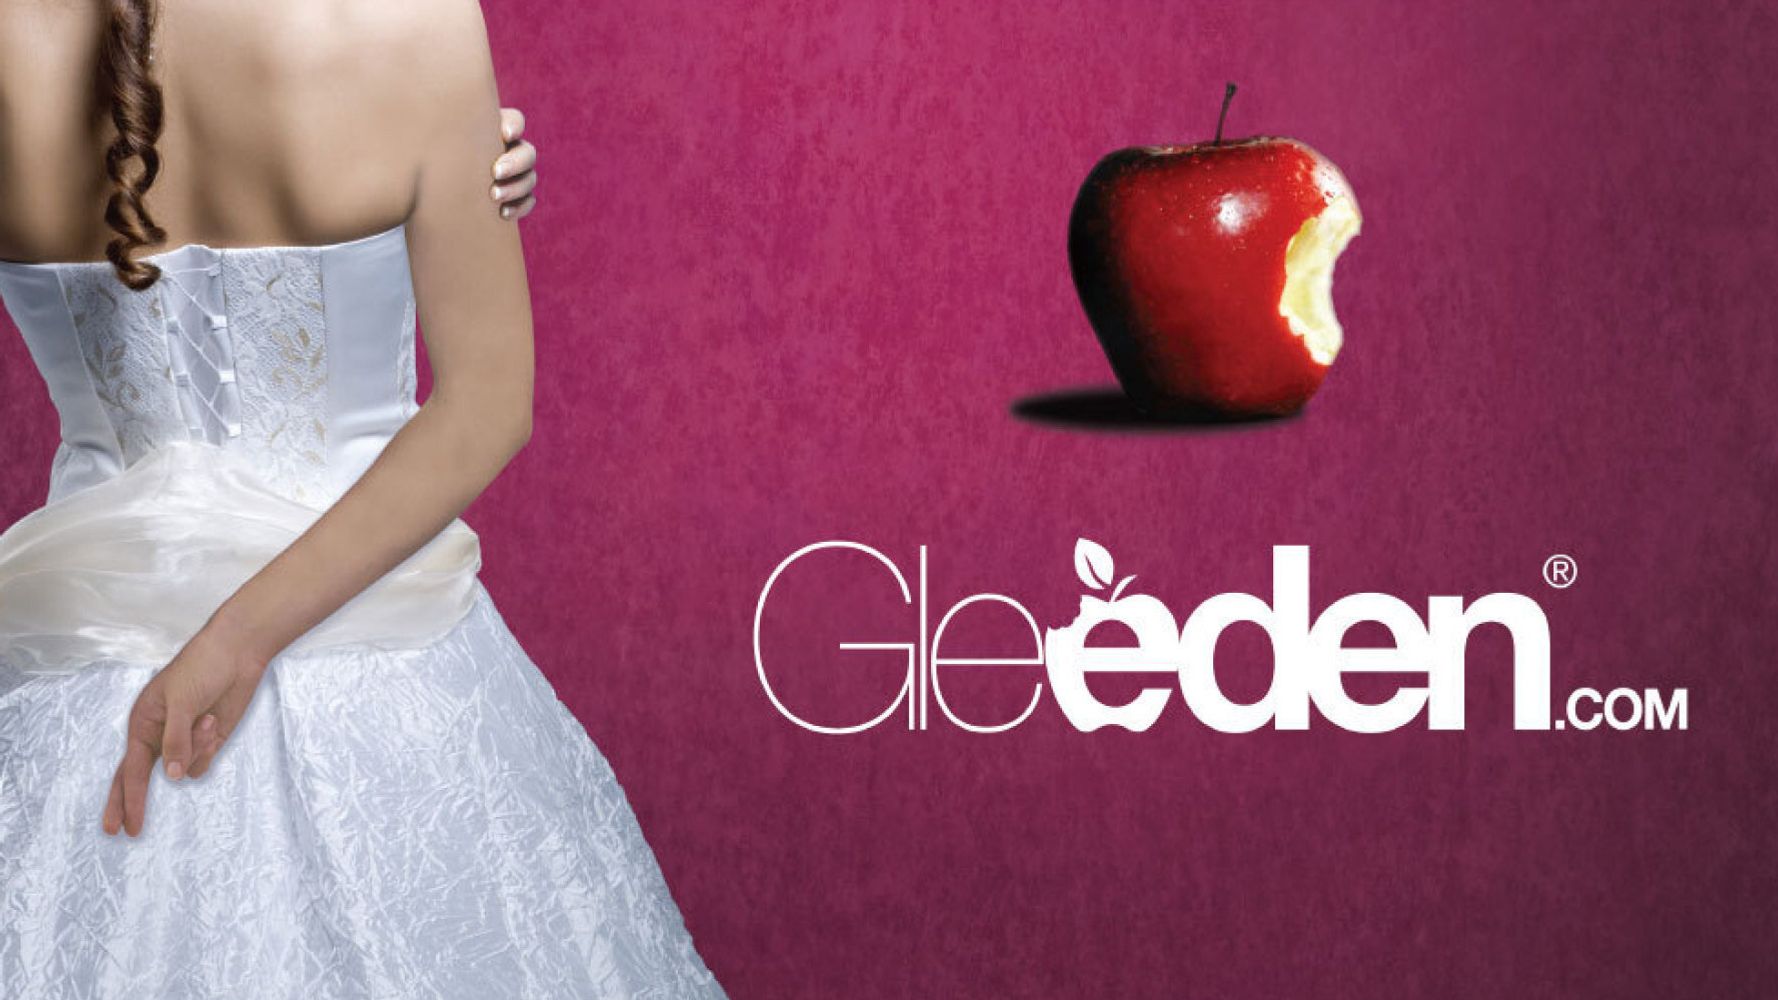 Everything to know about Gleeden, the extra-marital dating app